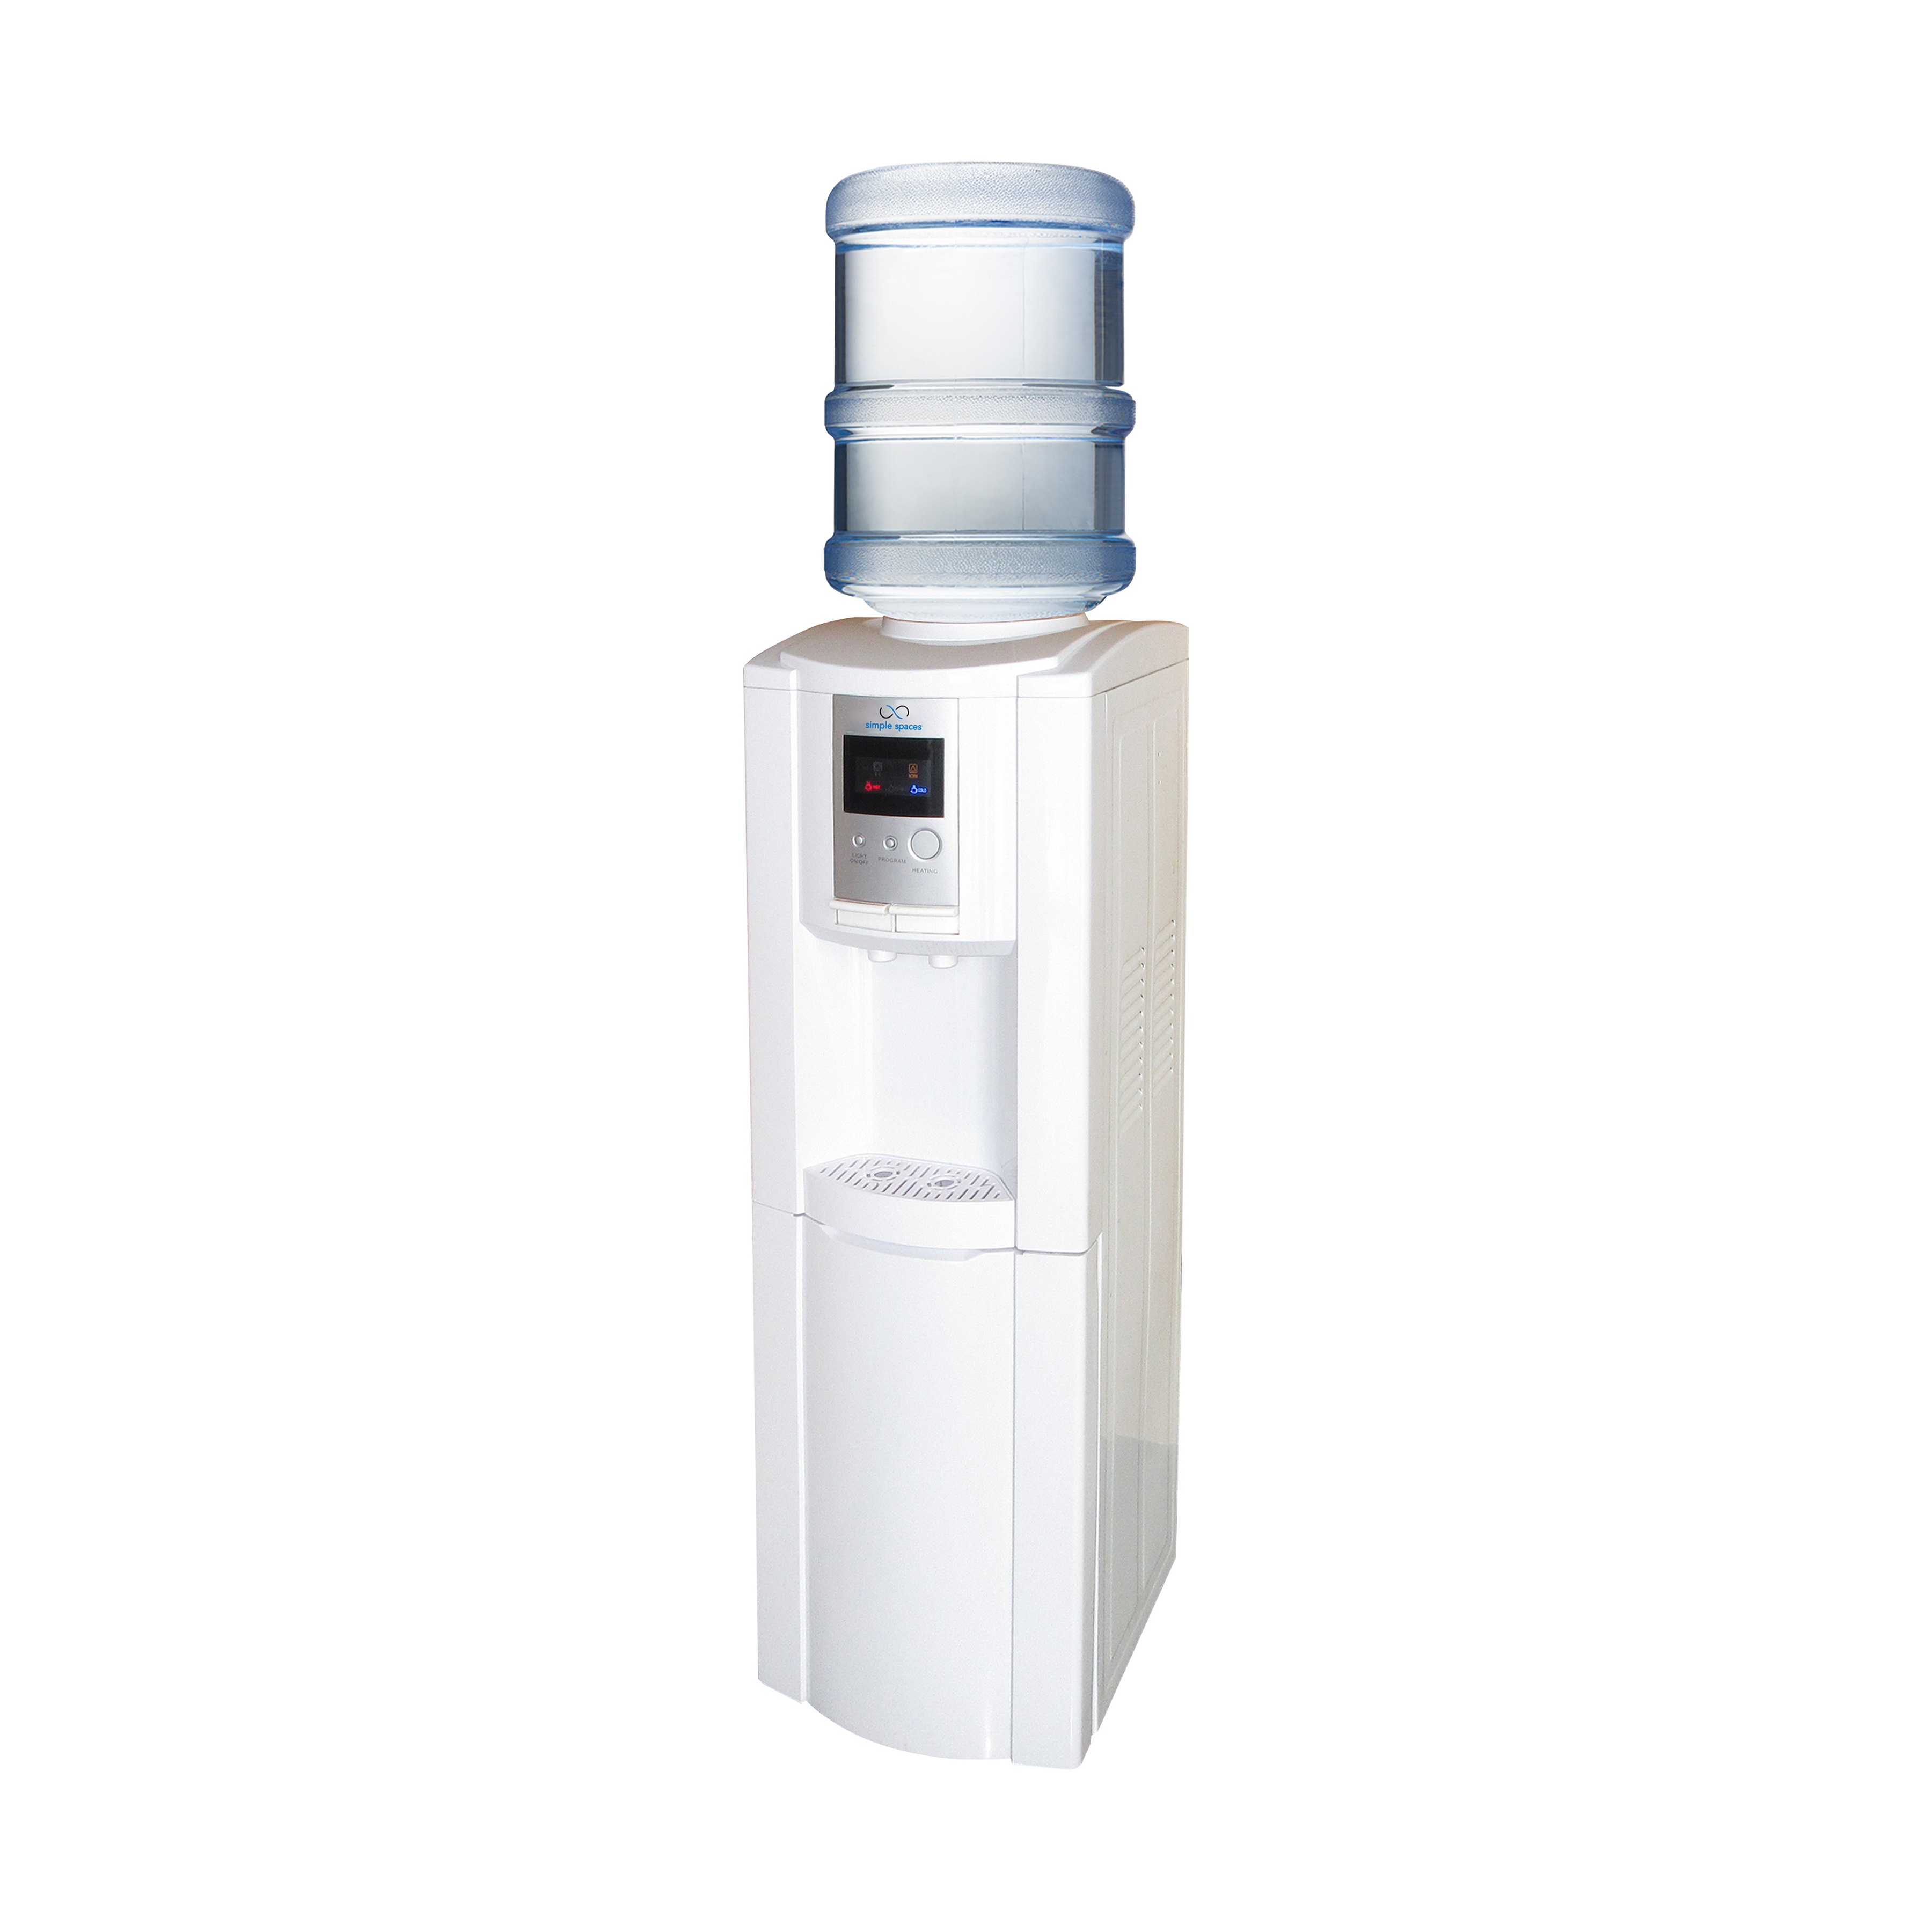 MYL10S-W-2HC-3L Hot and Cold Water Dispenser, Hot: 1 L & Cold: 3.2 L Tank, 15 L Cooler, 500 W Heating